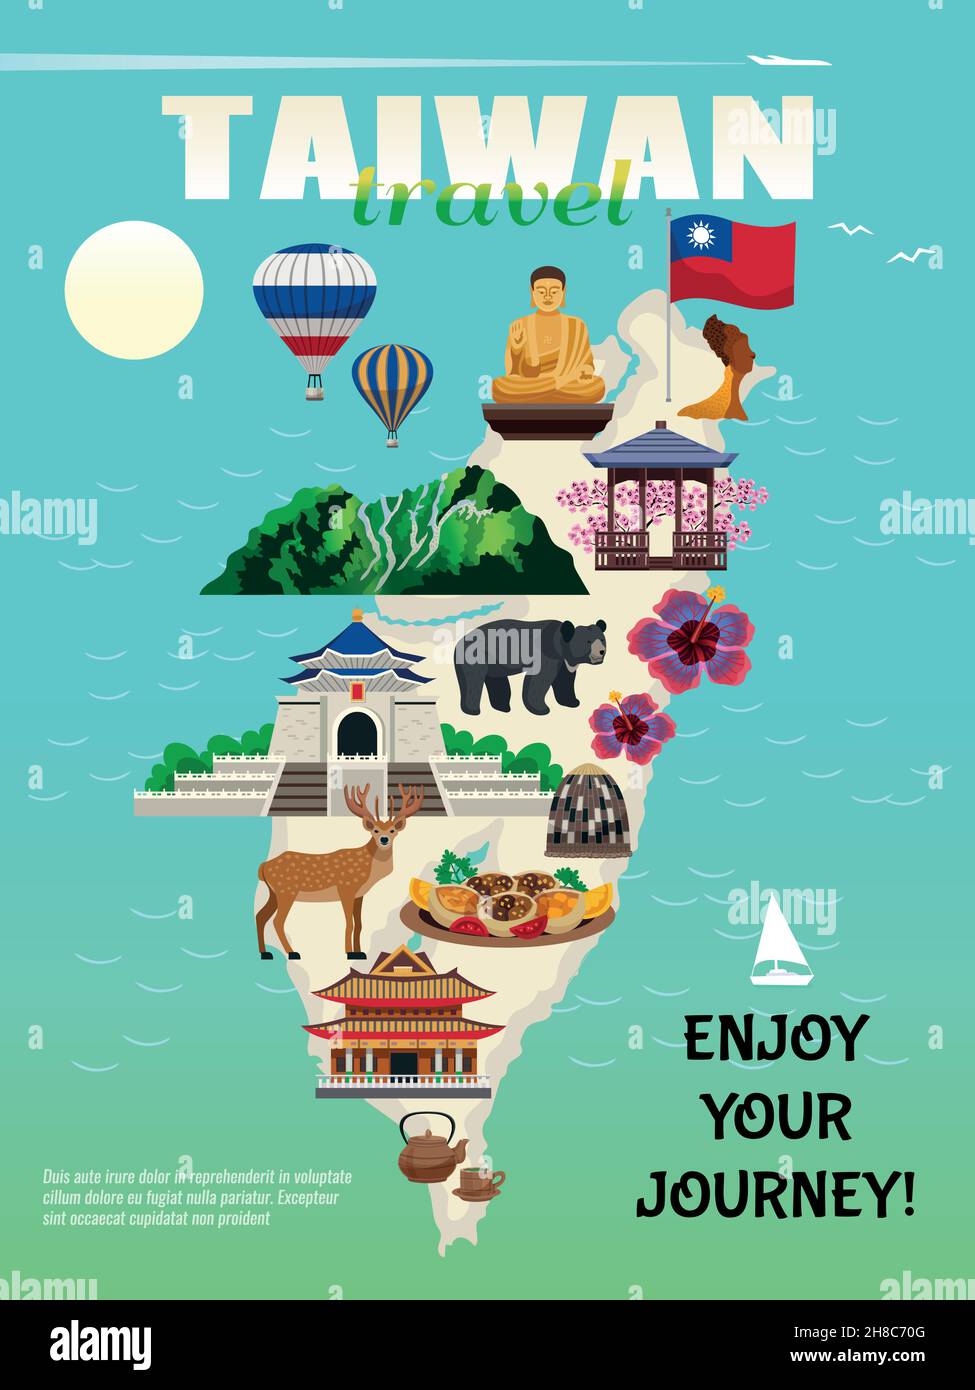 Taiwan travel country cultural map flat advertisement poster with national food sightseeing landmarks attractions symbols vector illustration Stock Vector